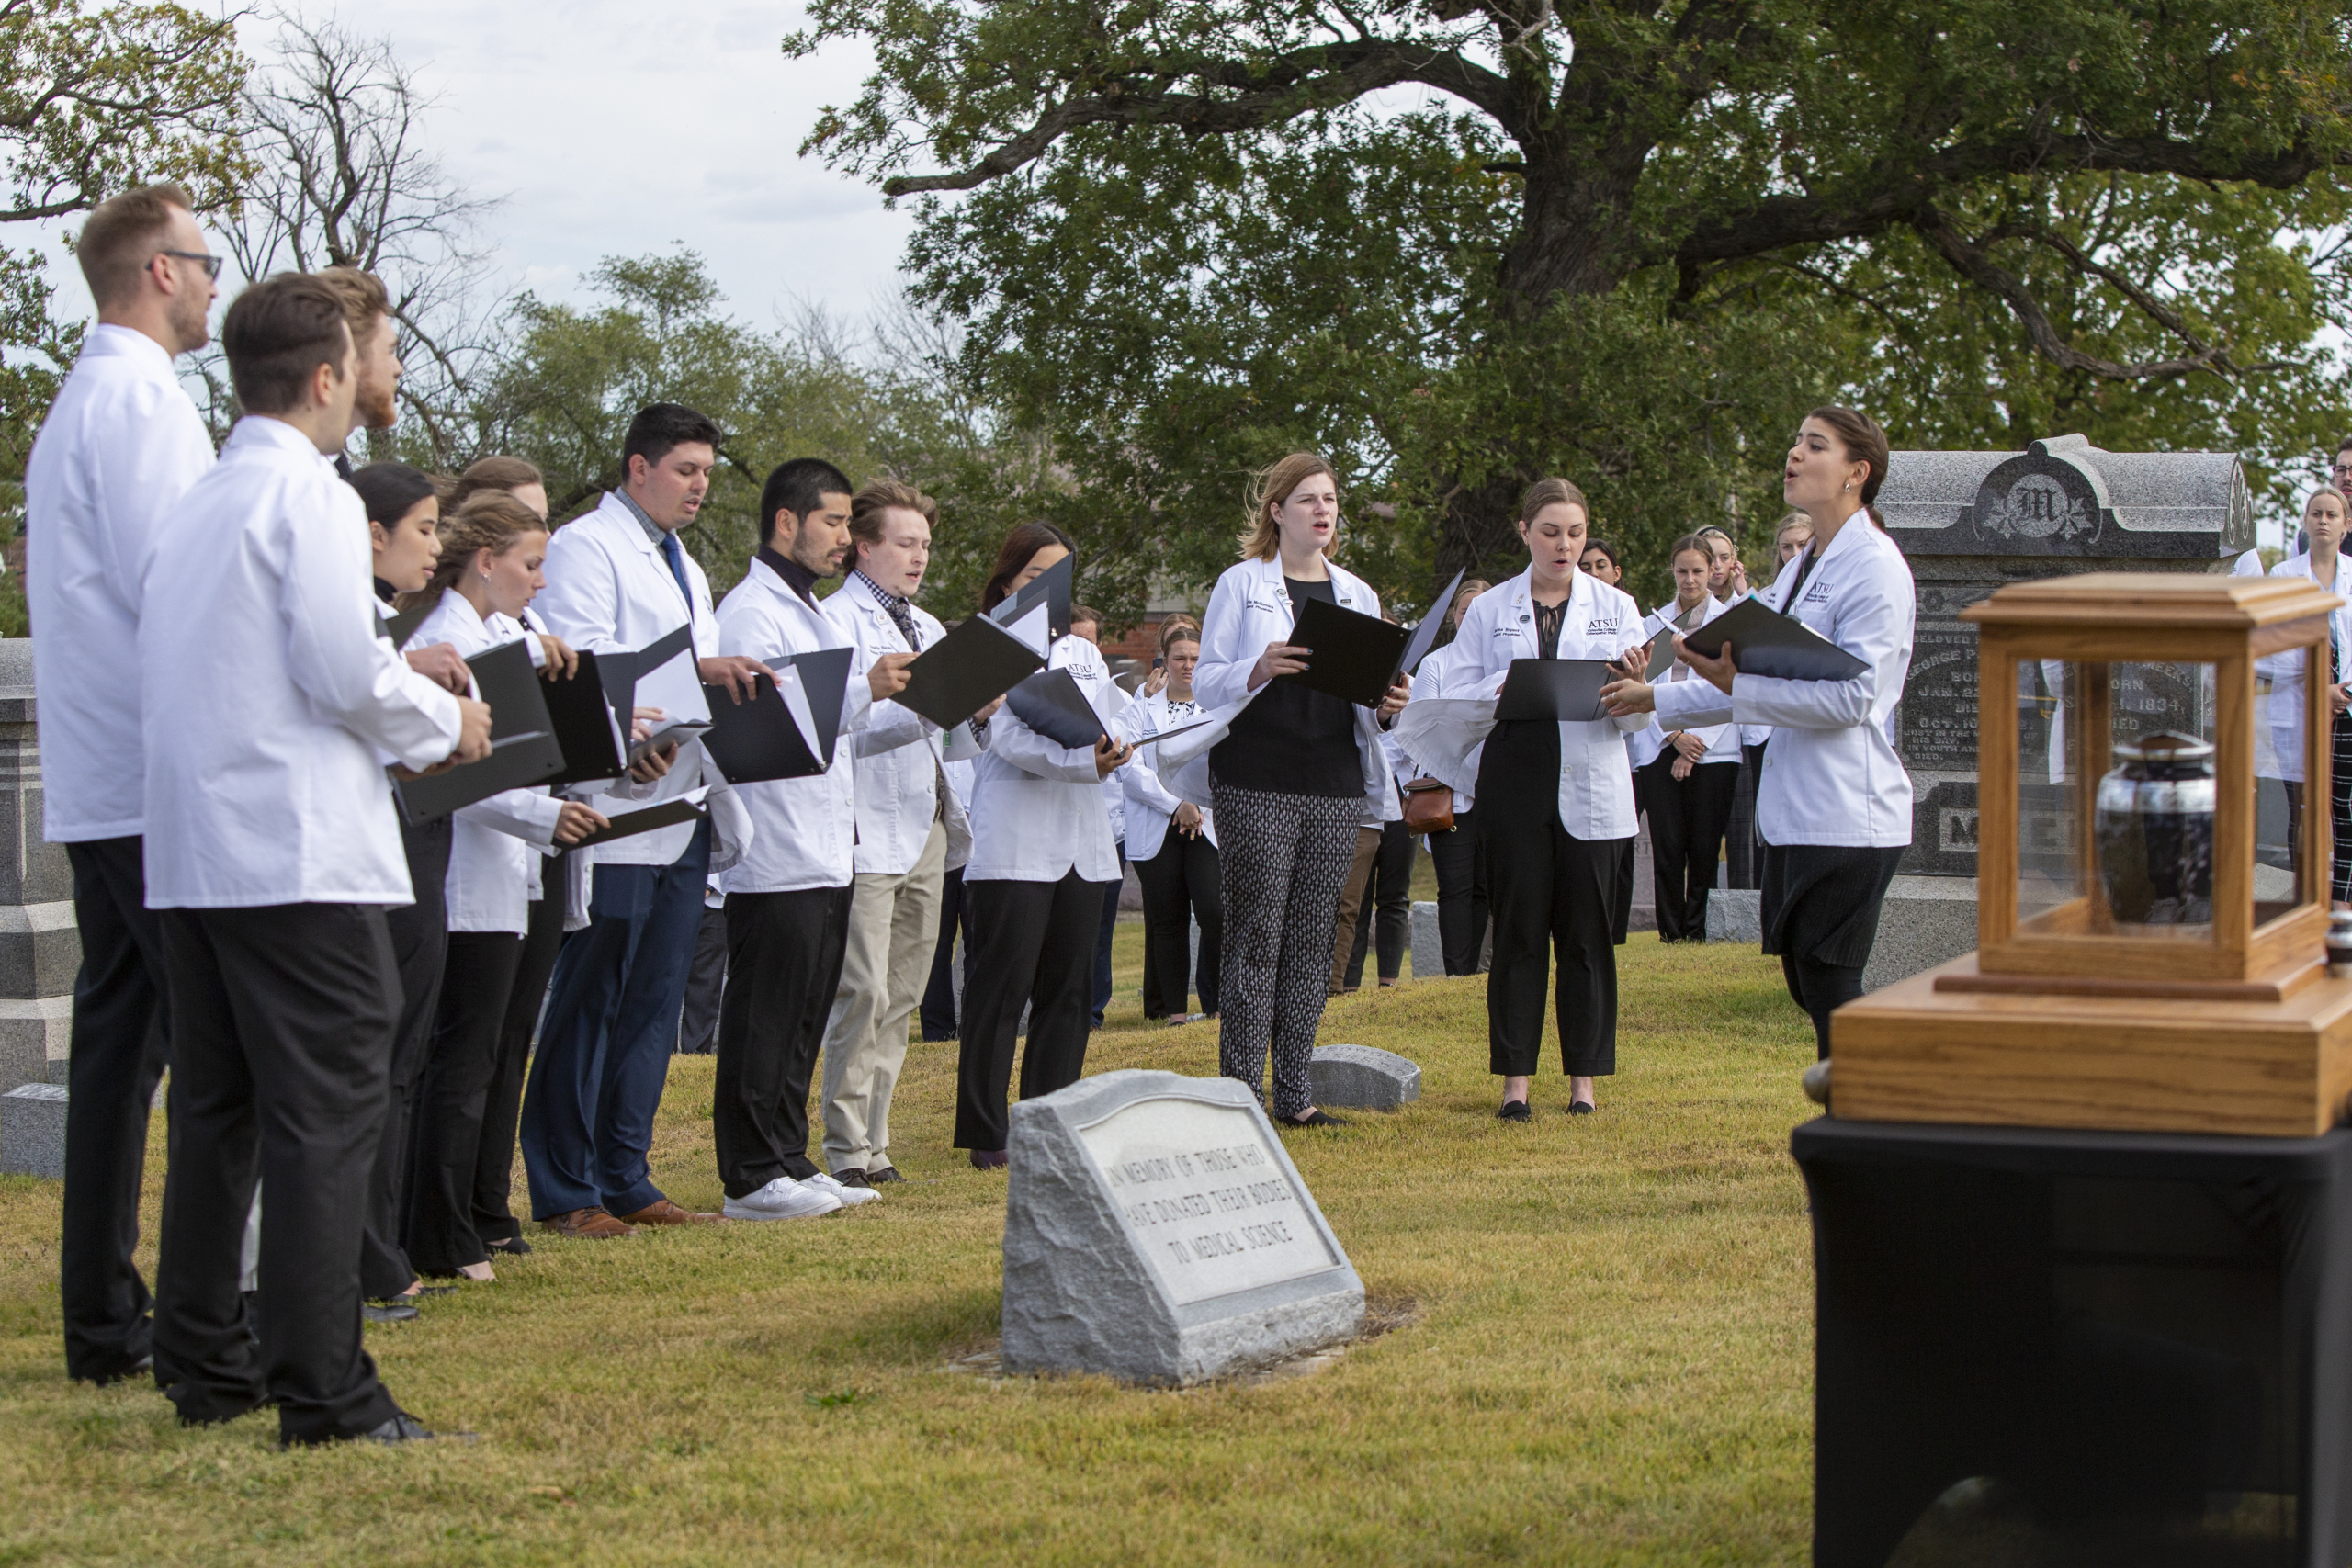 Medical students wearing white coats gather in a cemetery and sing "Amazing Grace" in honor of those who have donated their bodies to medical science.